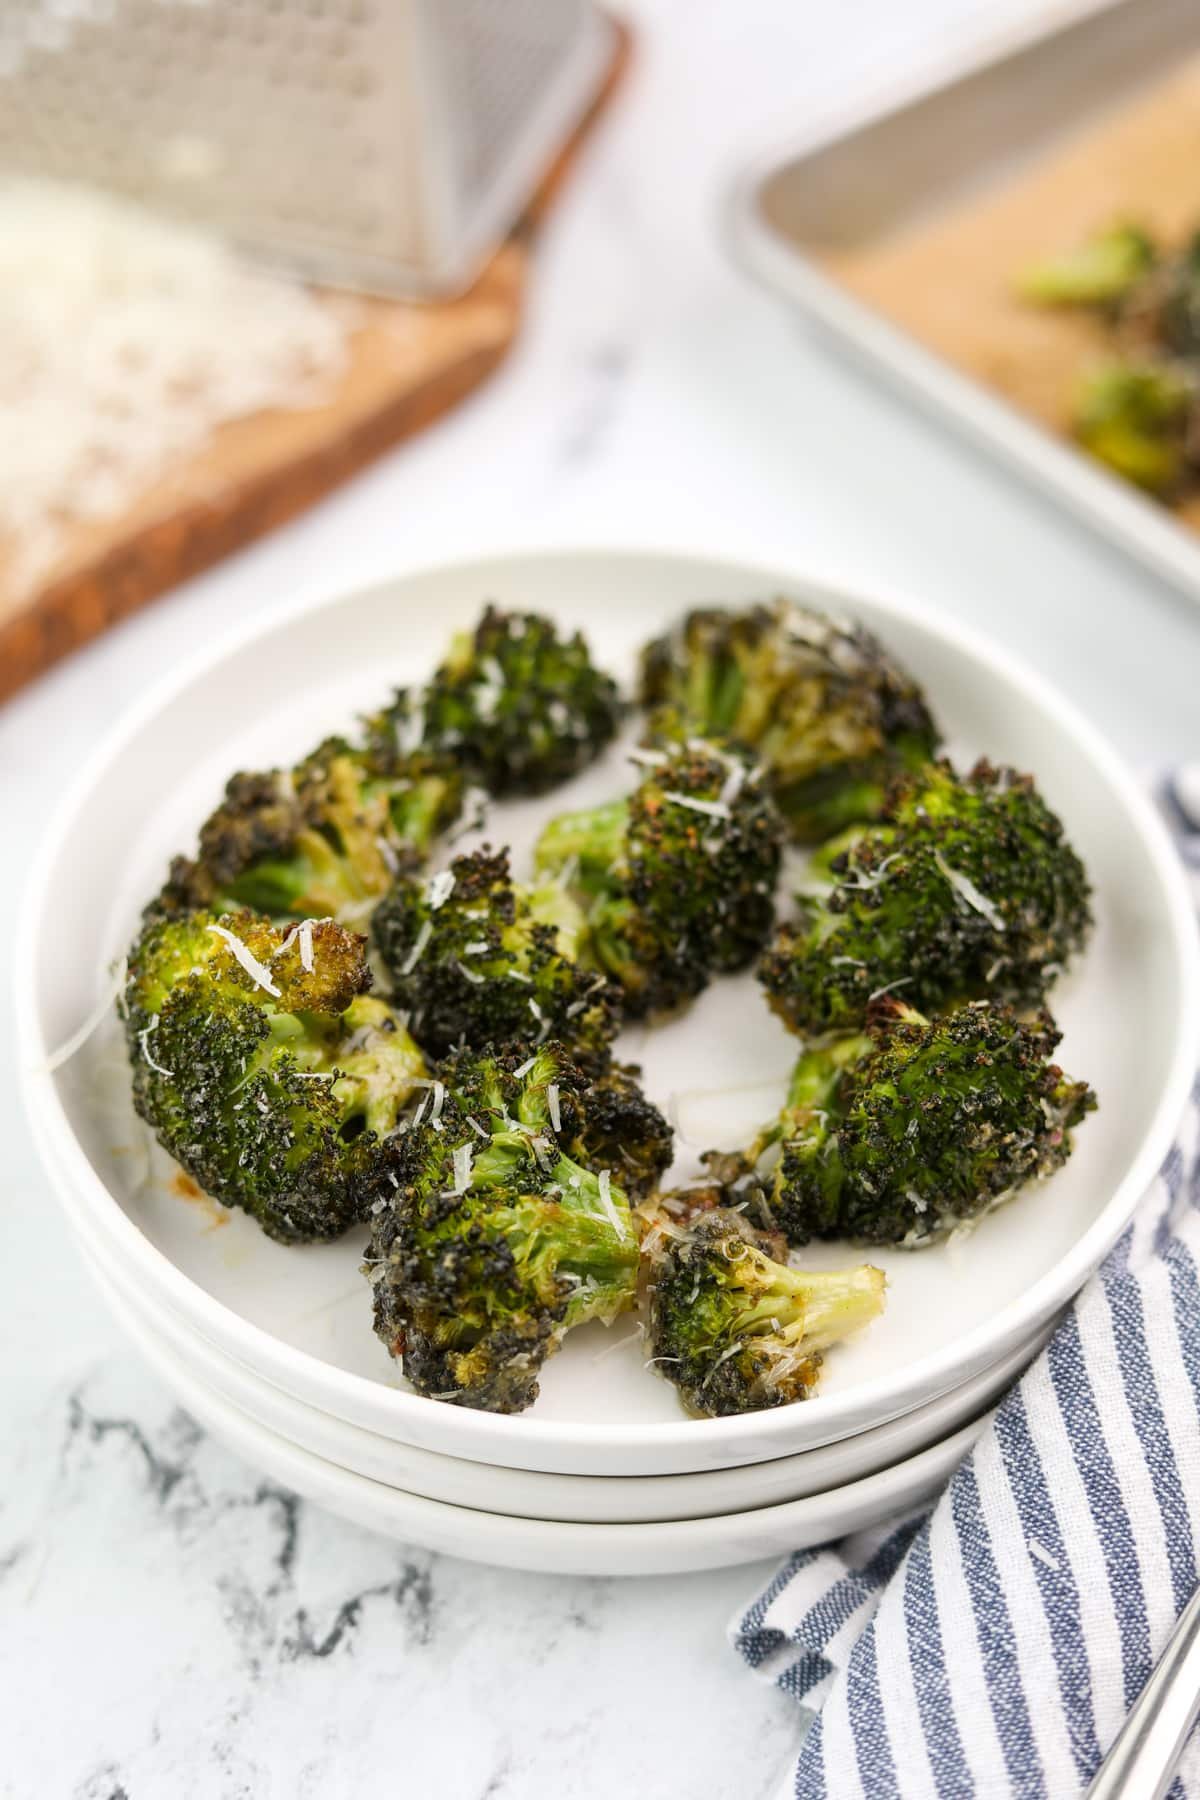 A small plate with a serving of roasted broccoli.